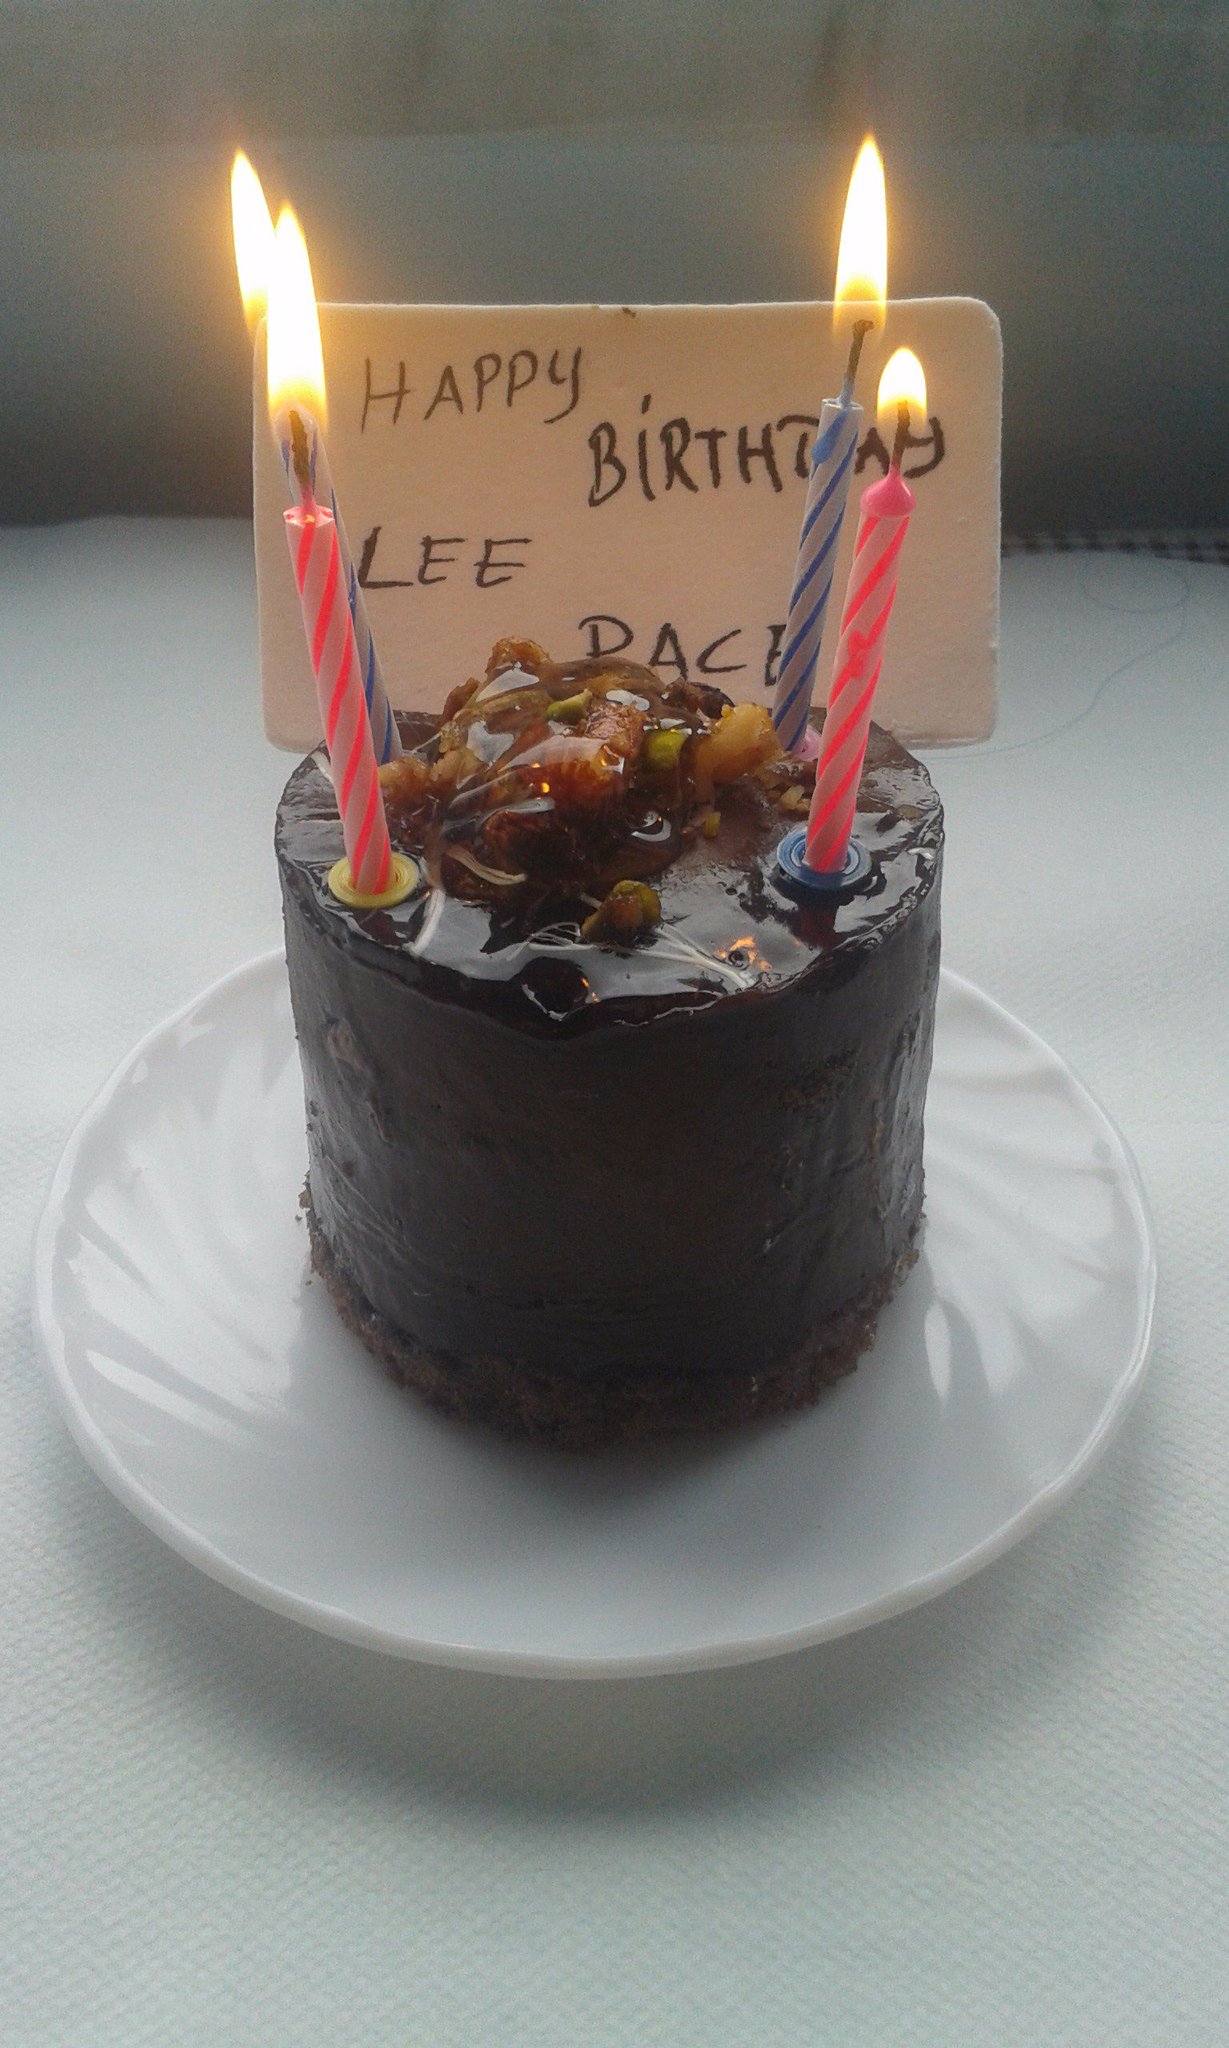  I was late. Happy birthday Lee Pace, I love you. 